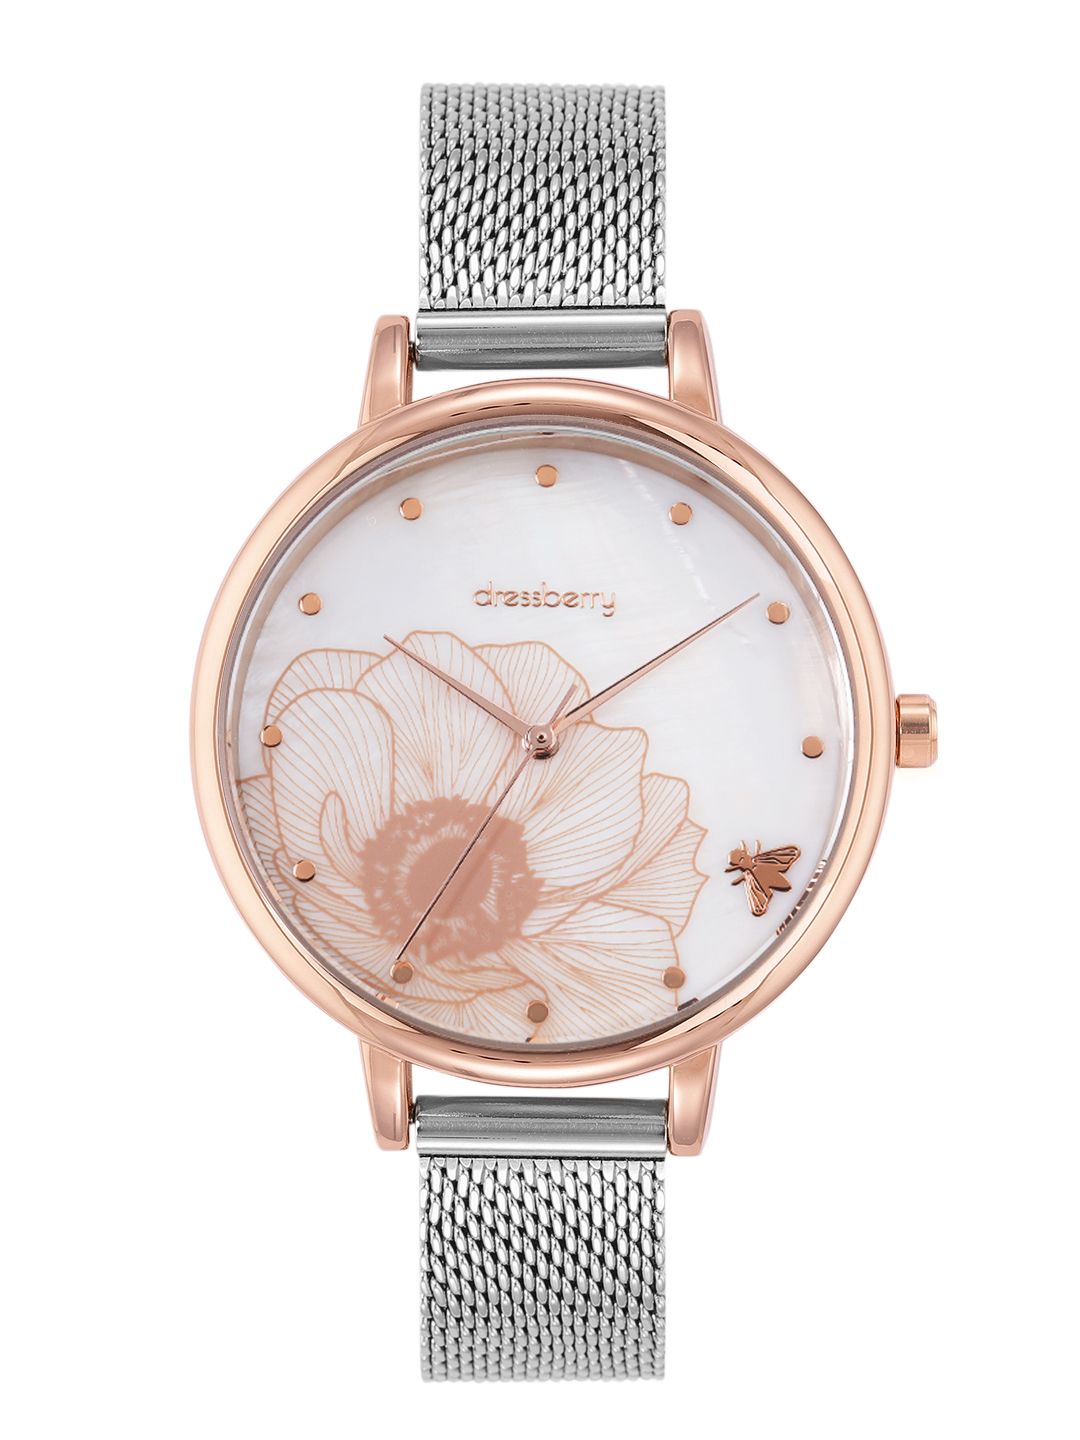 DressBerry Women Peach-Coloured Printed Analogue Watch MFB-PN-CHR-S2175 Price in India